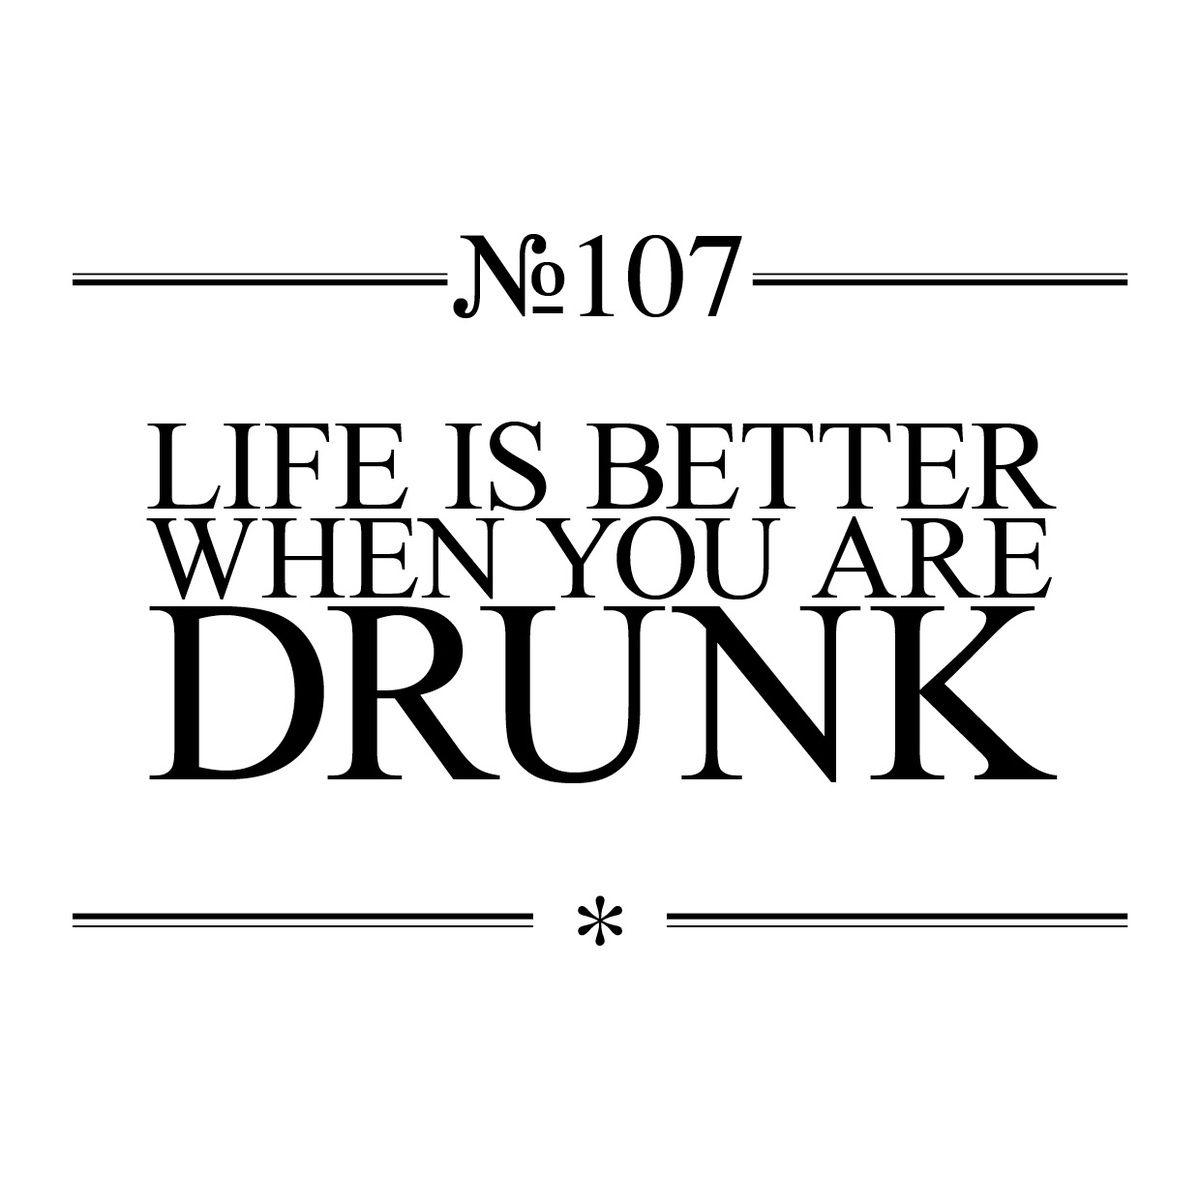 Famous quotes about 'Drunk'